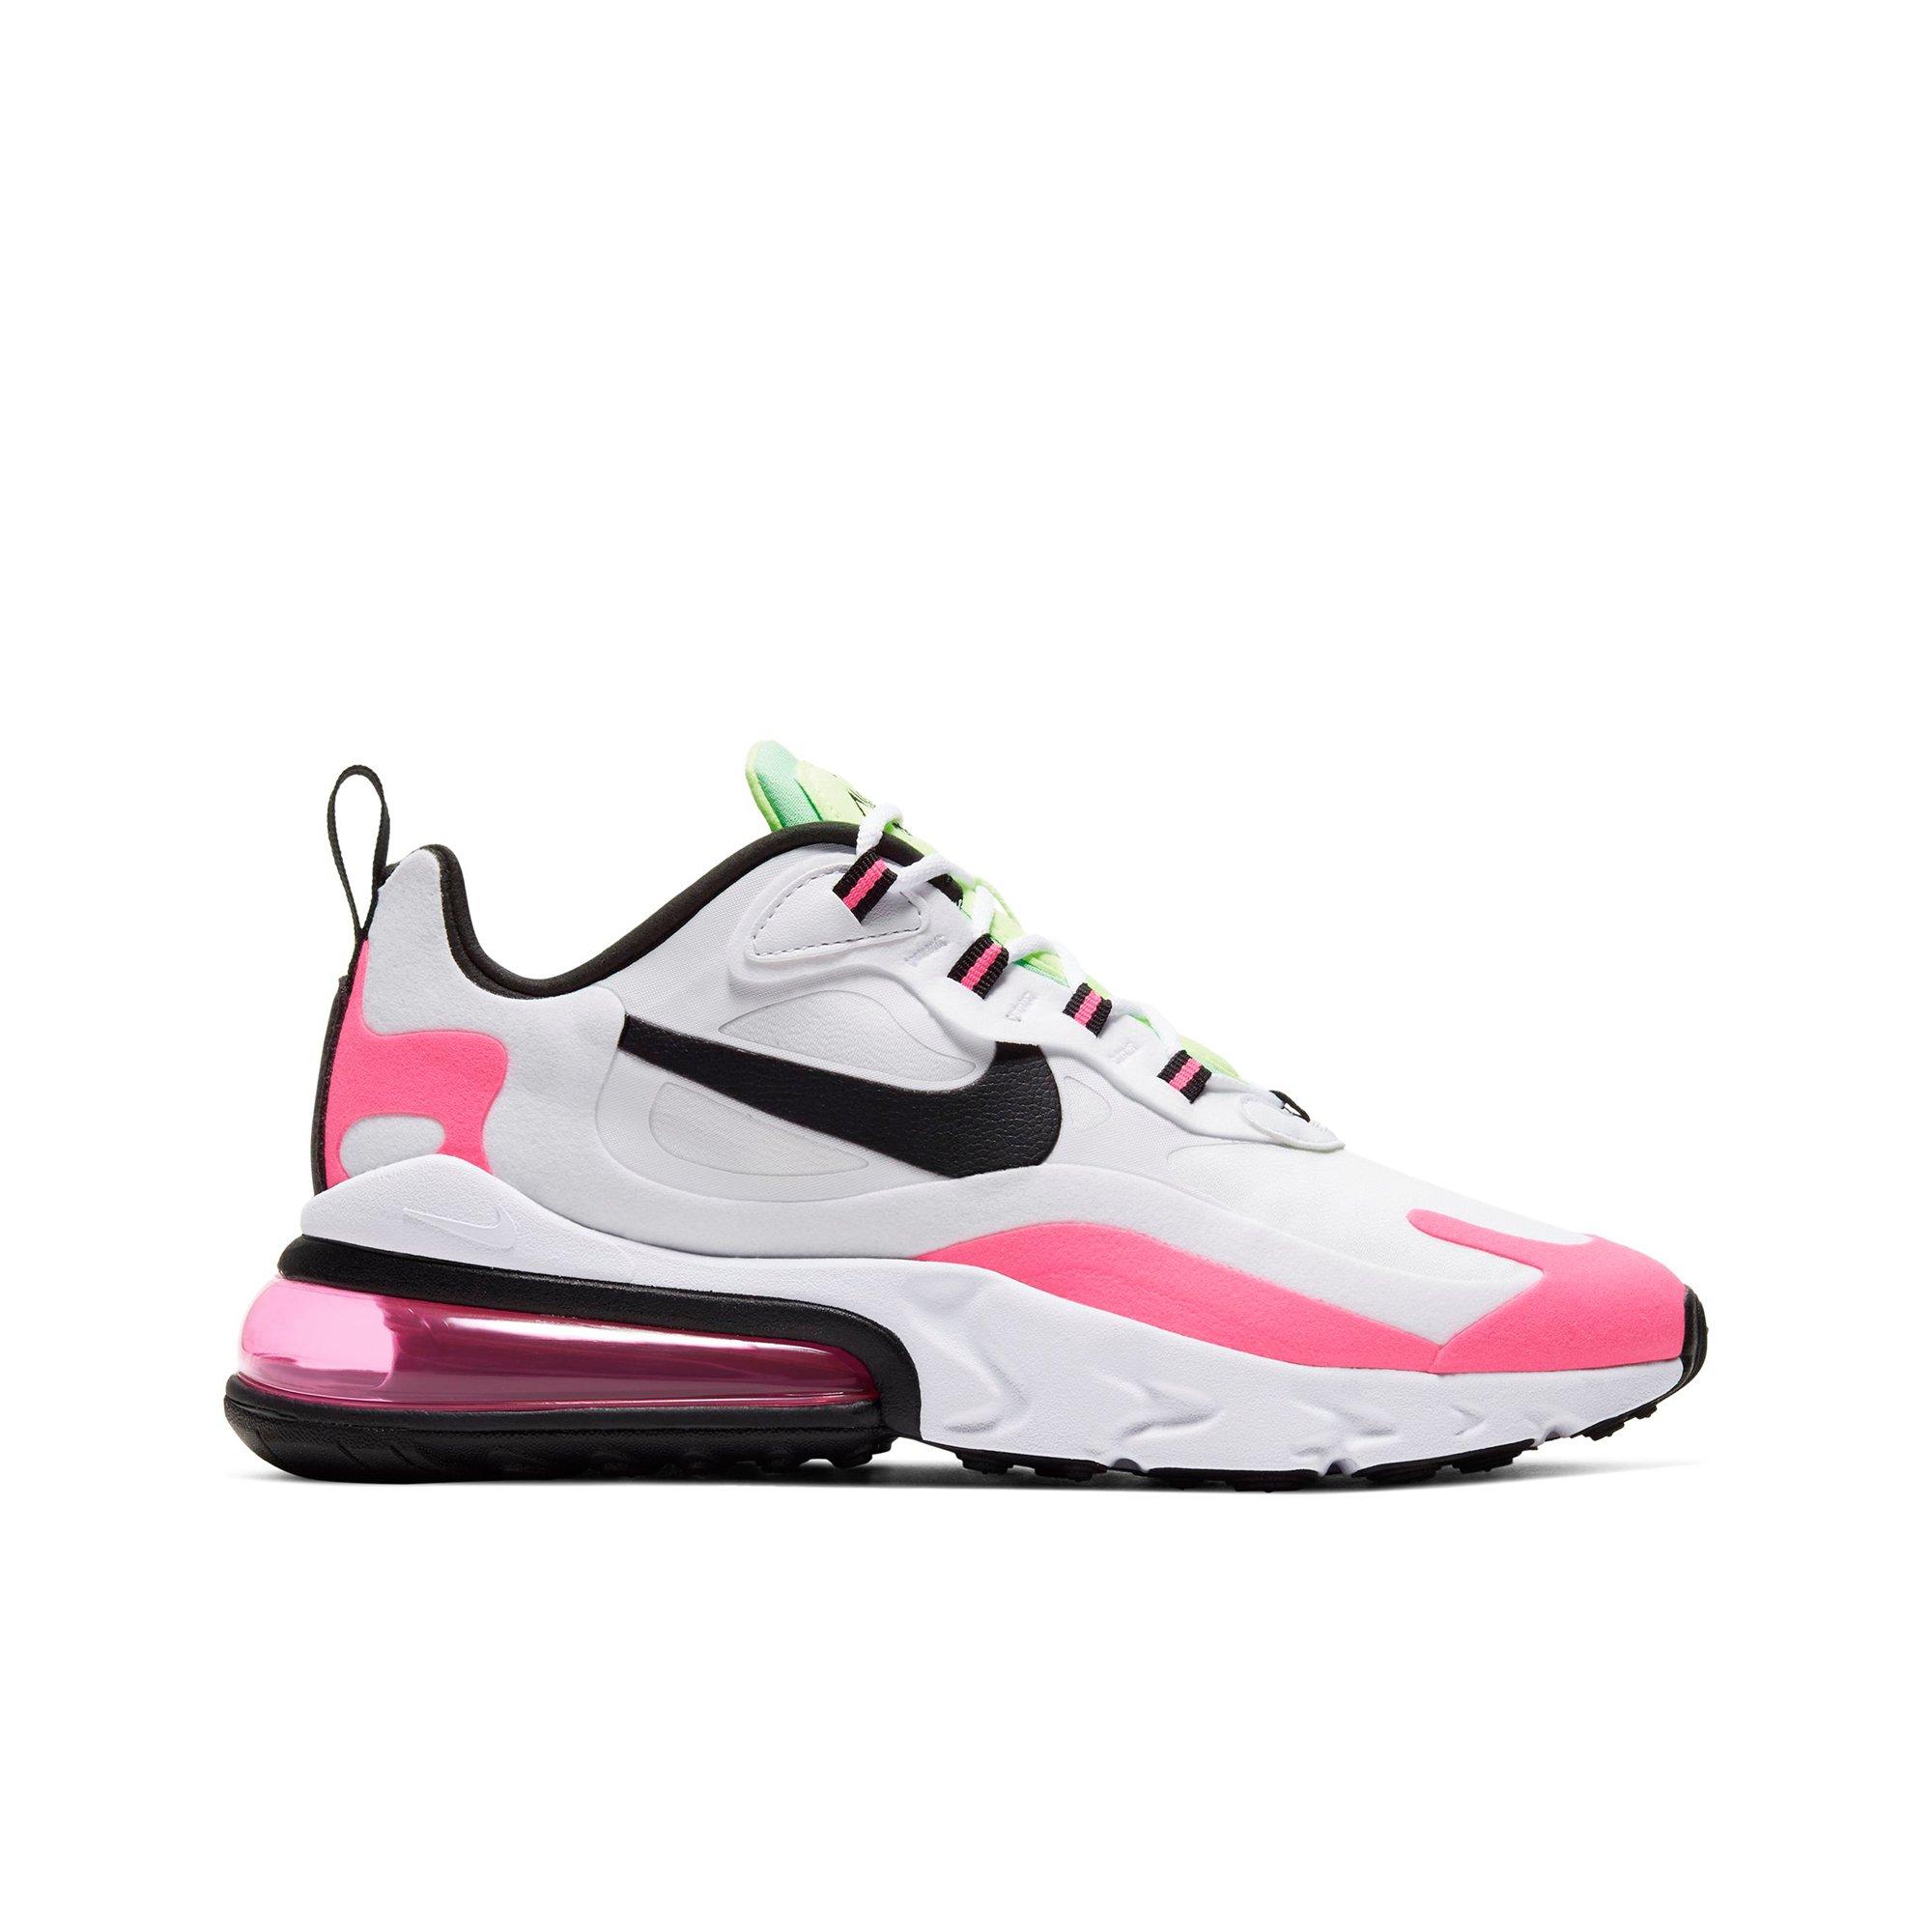 nike 270 in pink